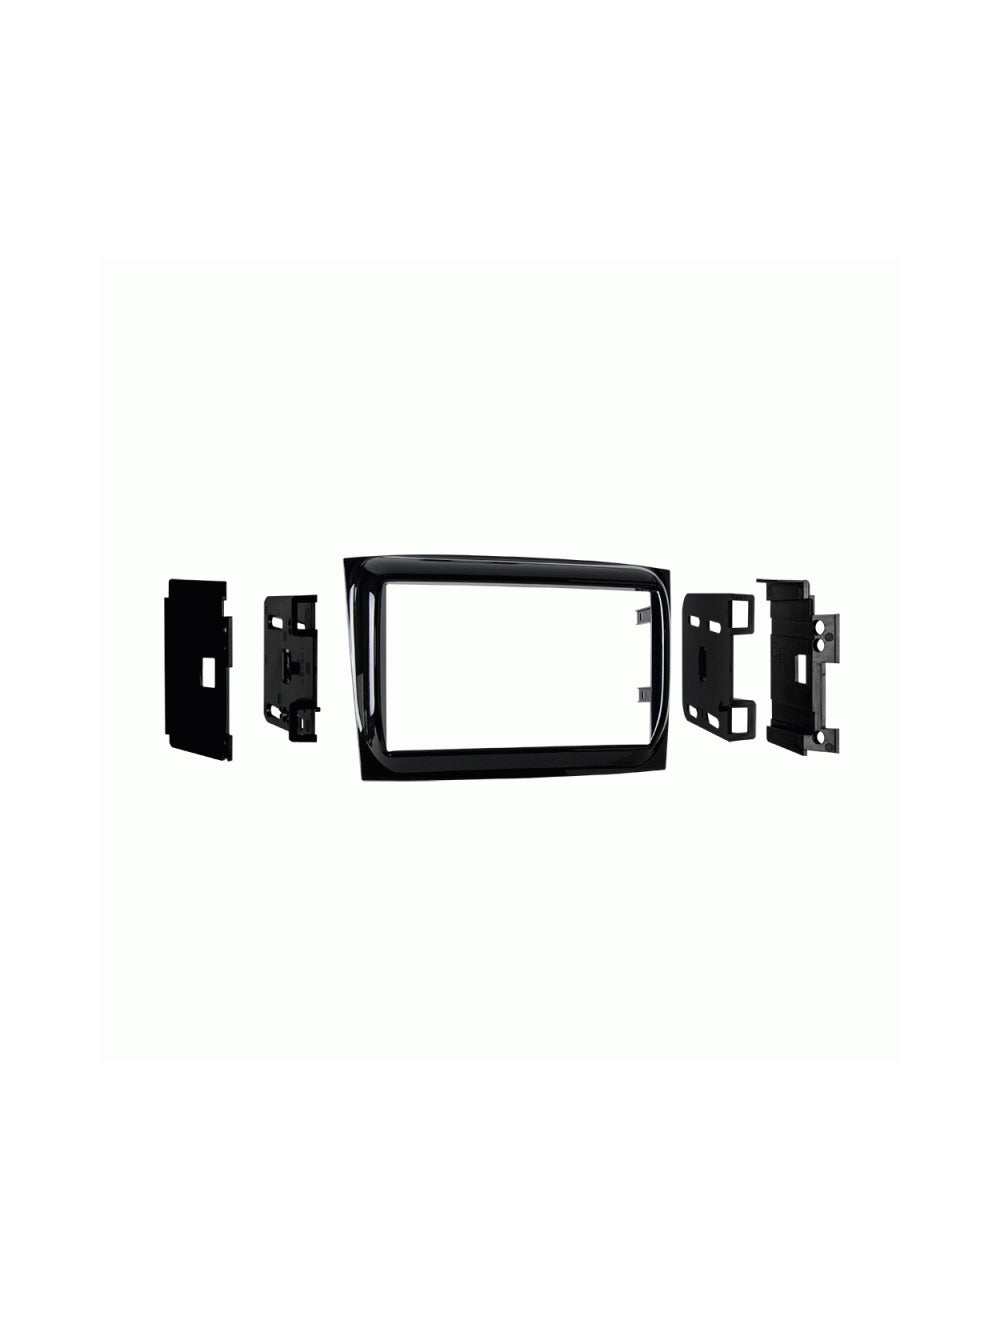 Metra 95-6531HG Double-DIN Radio Dash Kit for 2015-Up Ram Promaster City Vehicles (High Gloss Black)